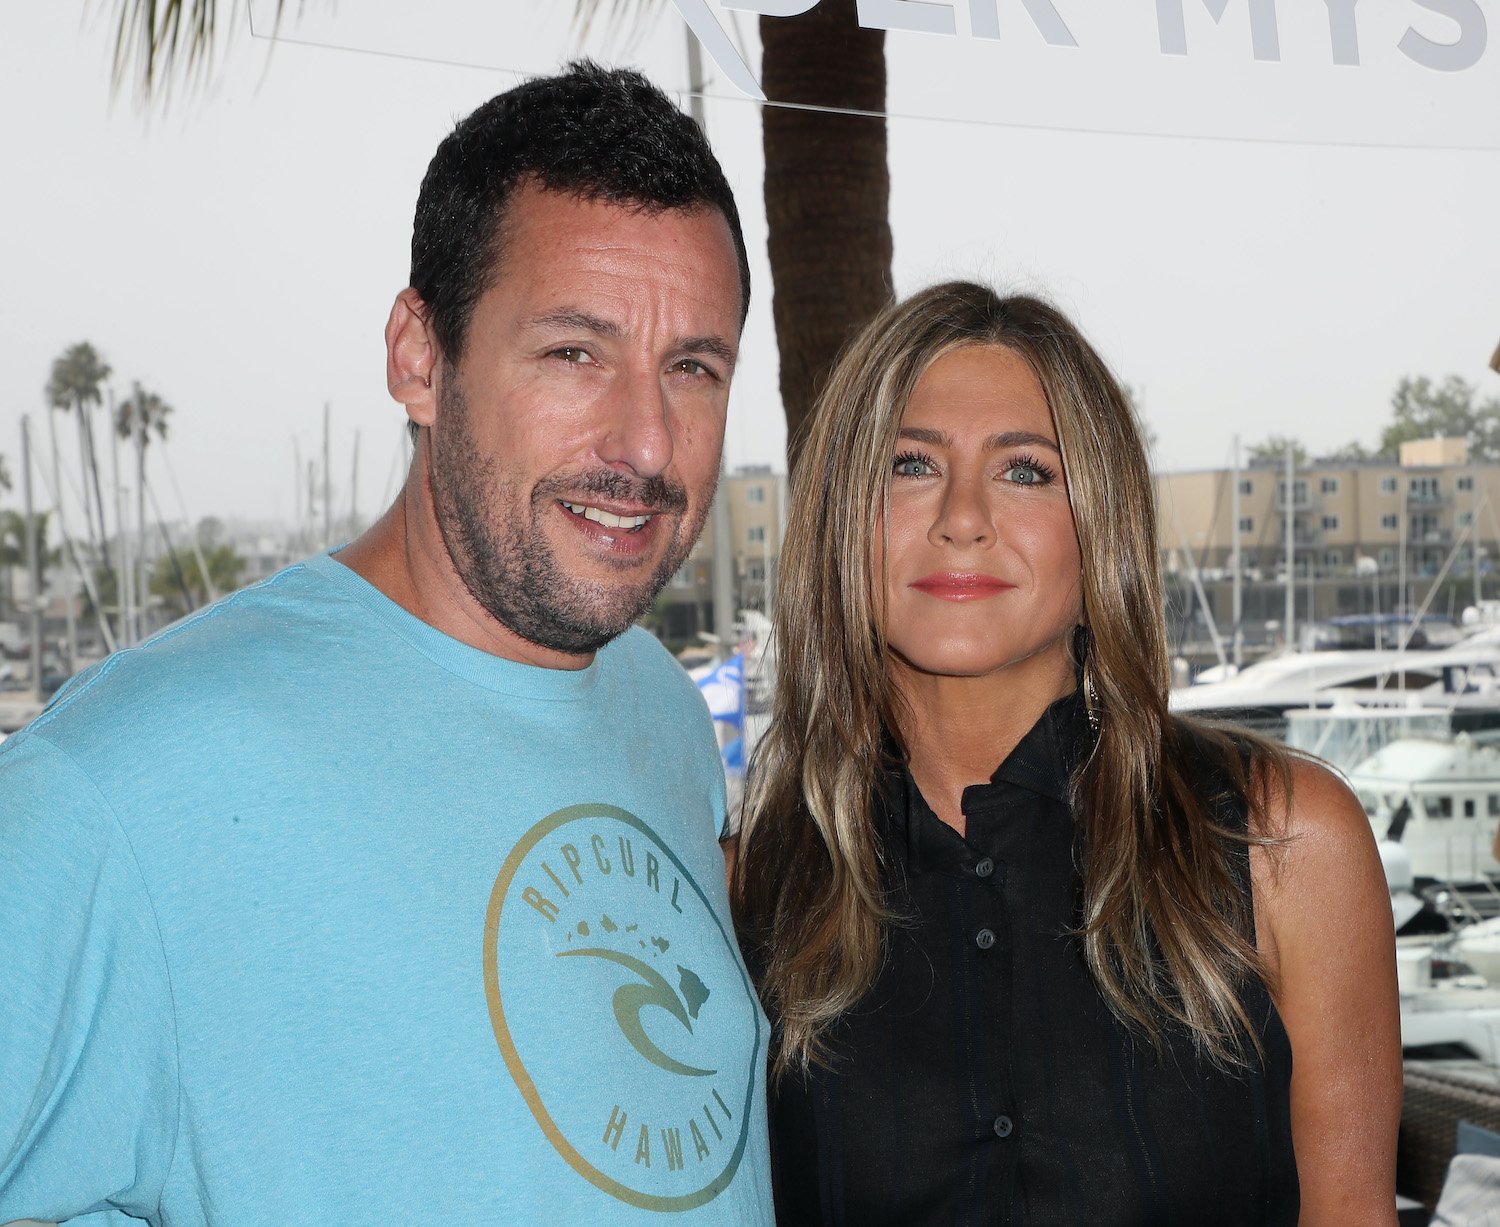 Adam Sandler wears a blue shirt and Jennifer Aniston wears a black shirt as they smile during a photocall of Netflix's 'Murder Mystery' in 2019